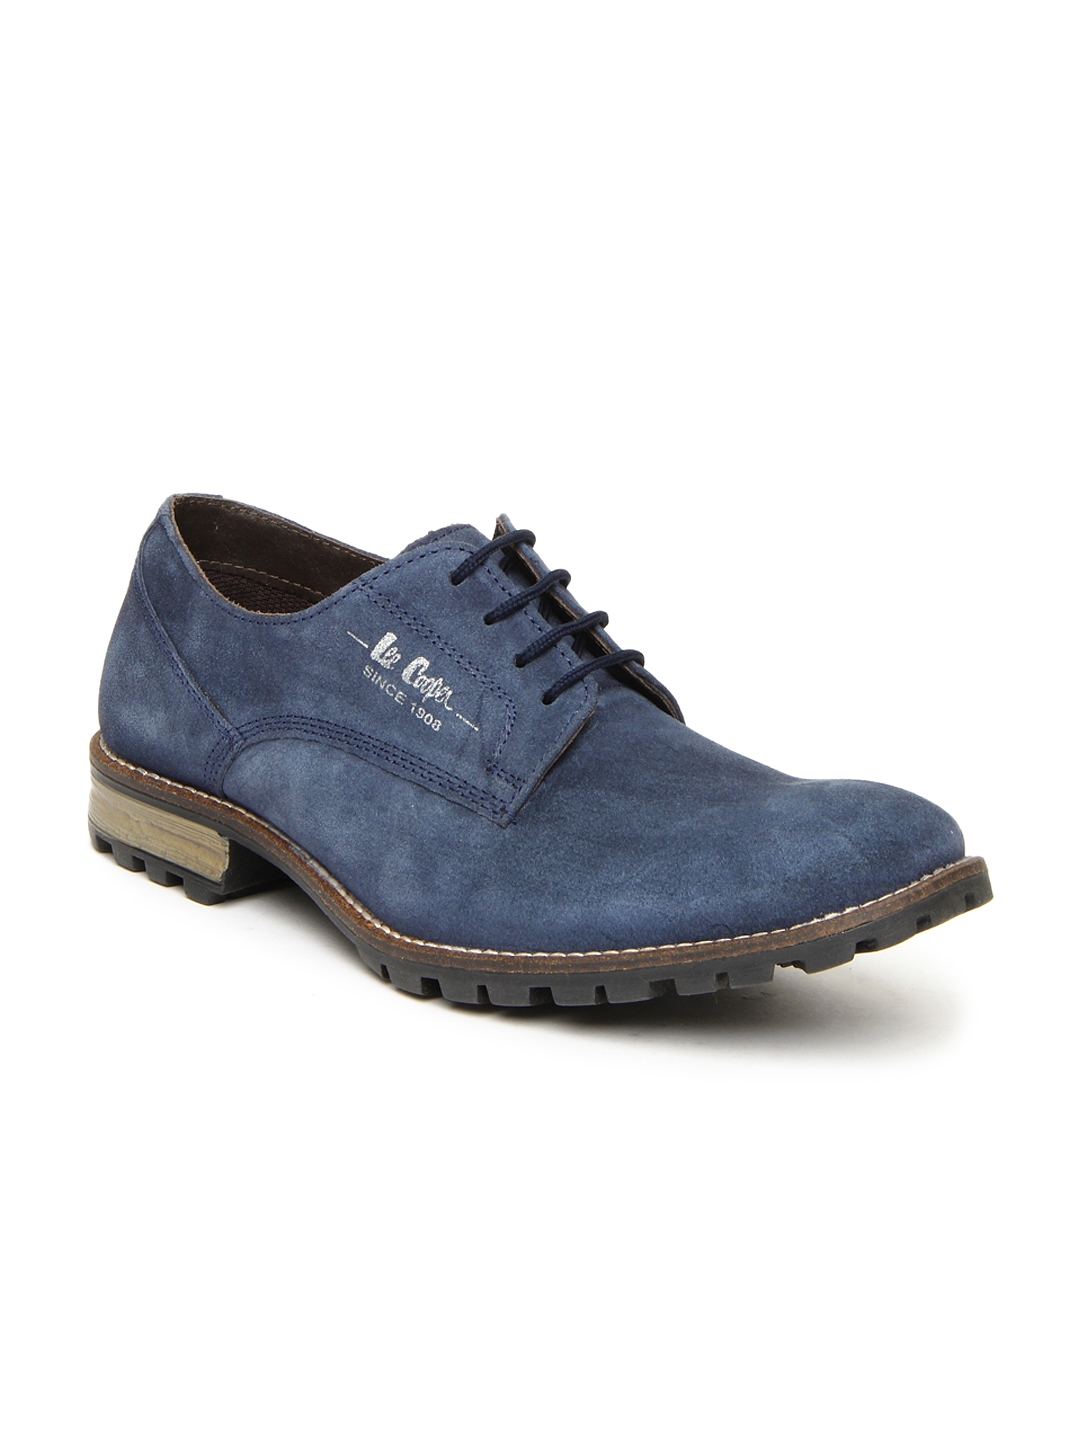 Buy Lee Cooper Men Blue Suede Casual Shoes - Casual Shoes for Men 318286 |  Myntra